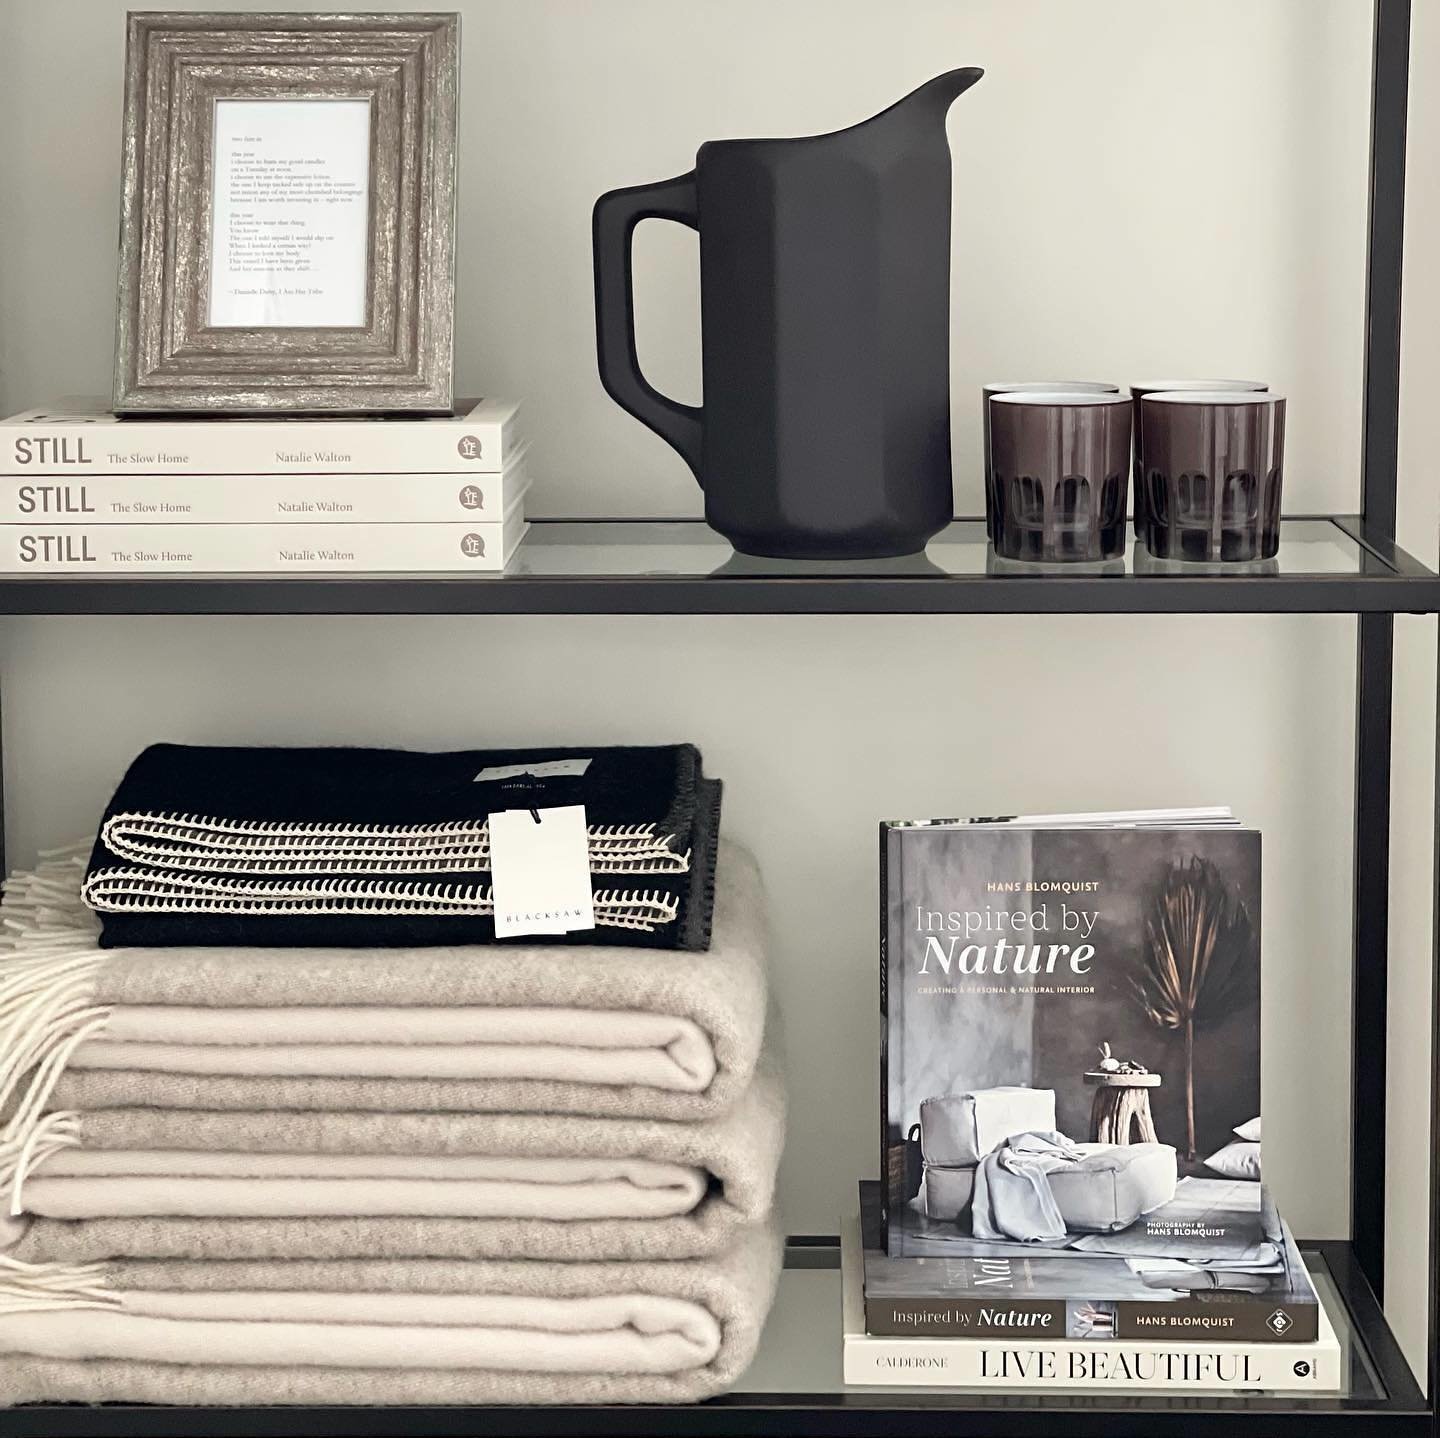 A collection of TCH favourites. 

#thecuratedhome #wealldeservetolivebeautifully #inspiredreading #throwblankets #oldfashioned #rialtoglasses #stoneware #stilllofepitcher #etagere #styling #yycdesign #yycinteriors #yychomes